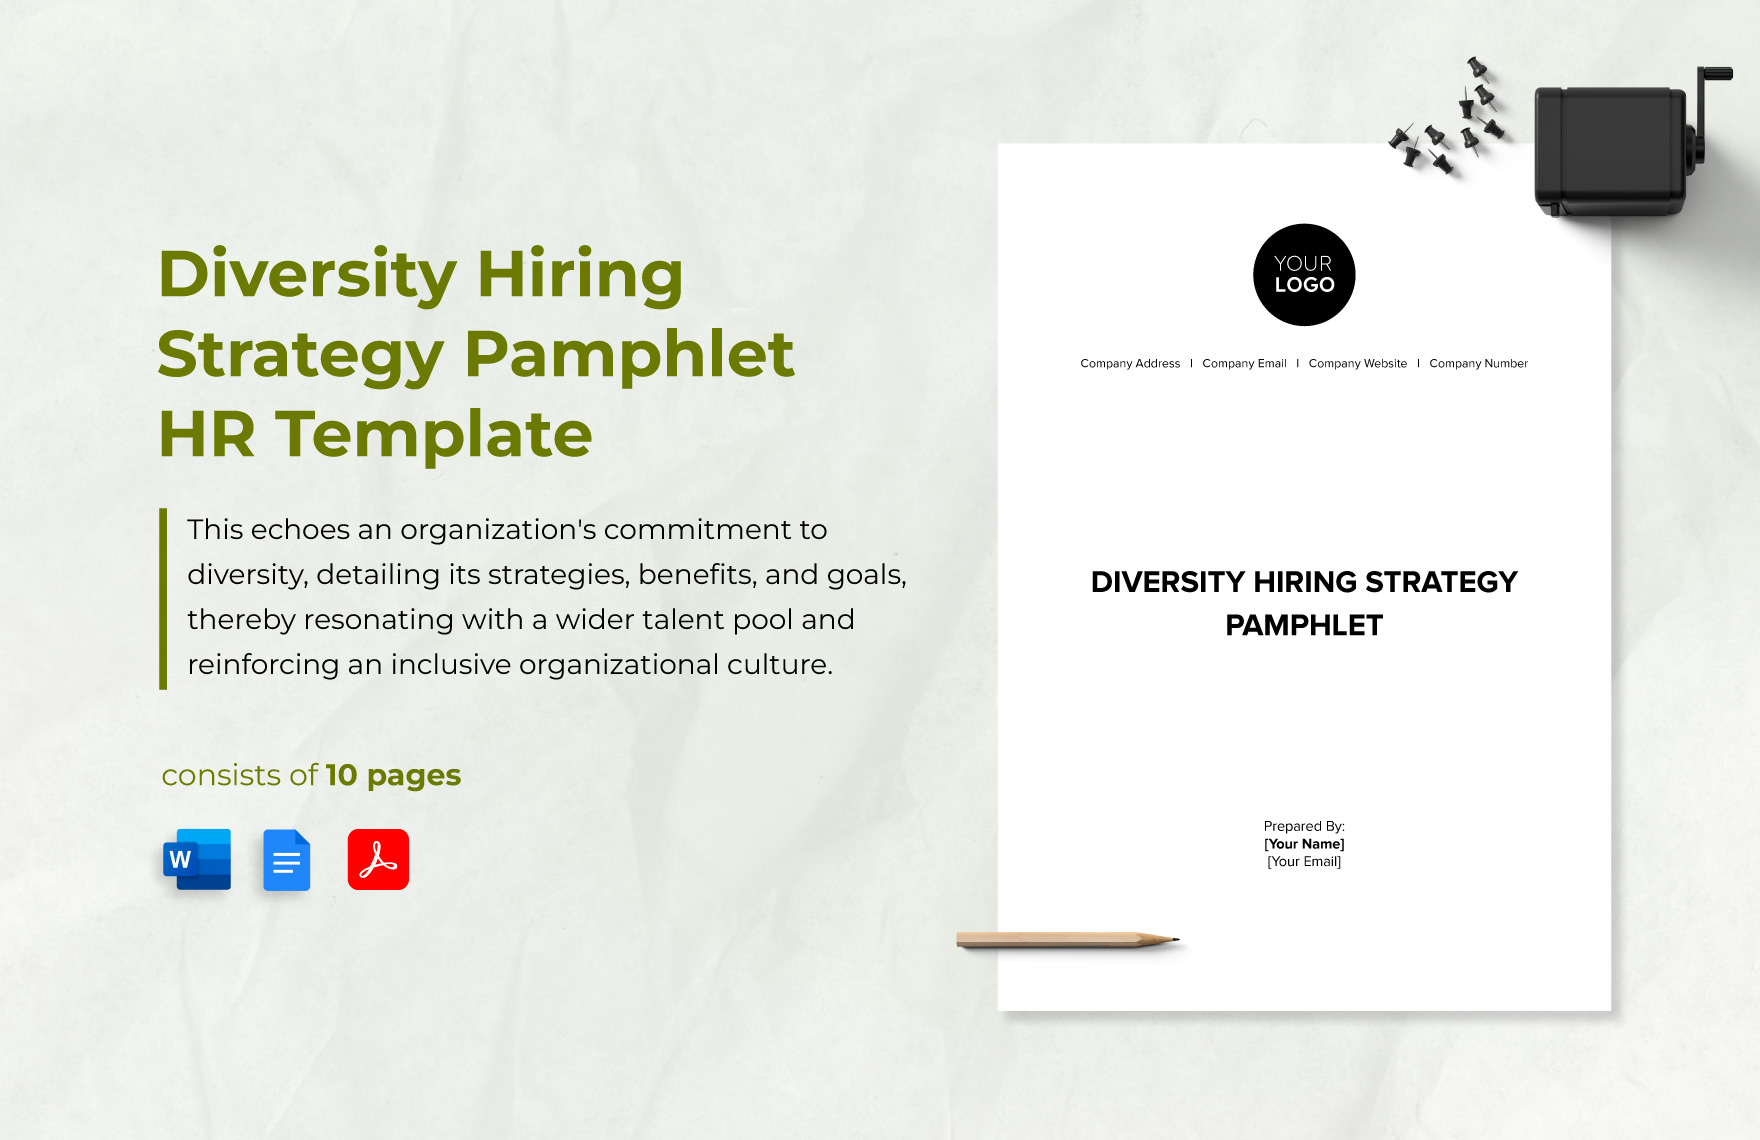 Diversity Hiring Strategy Pamphlet HR Template in Word, Google Docs, PDF